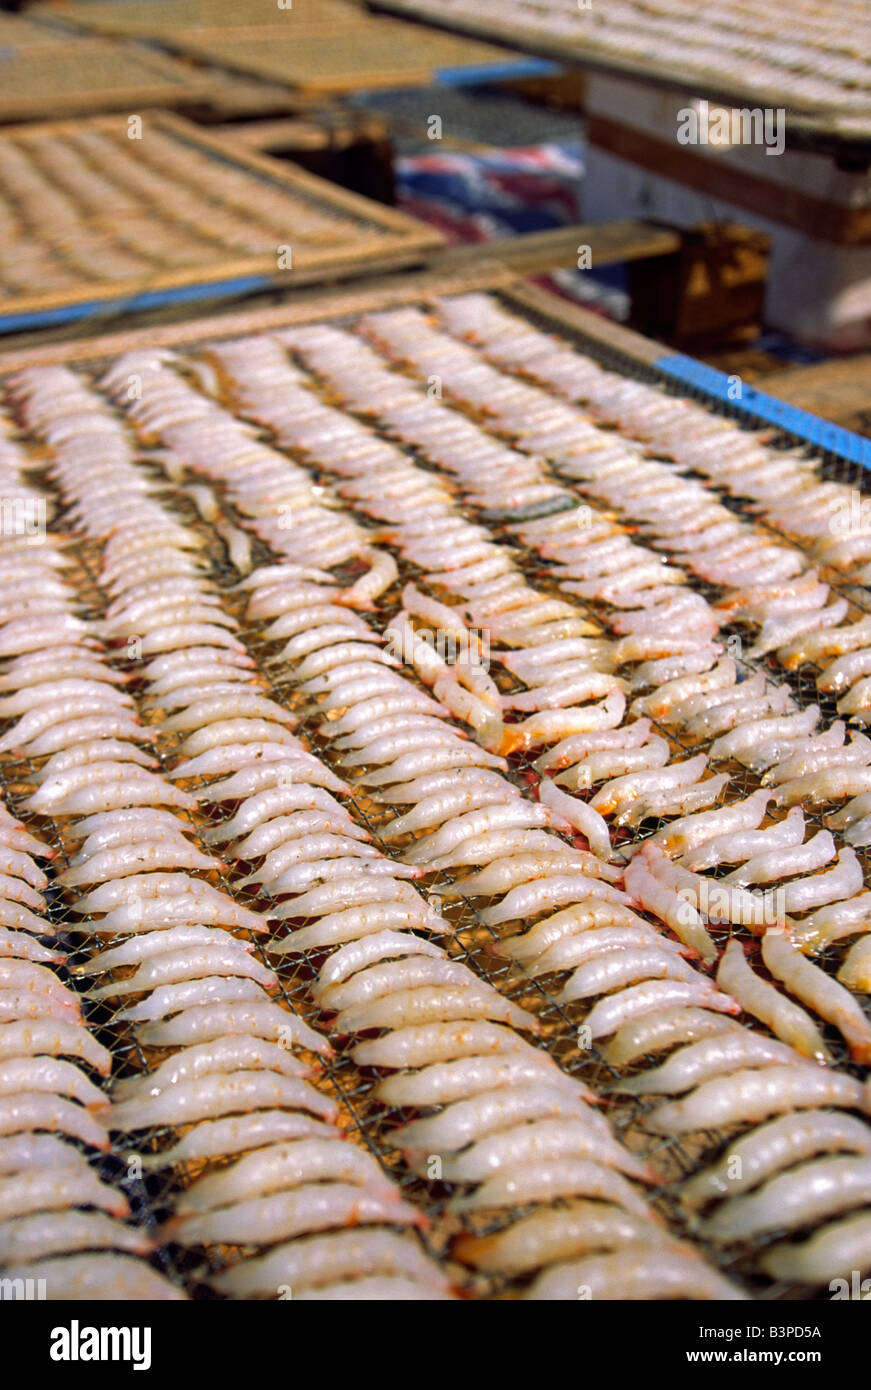 China, Hong Kong, Cheung Chau. Trays of shrimp lay out to dry on the waterfront on the the outlying island of Cheung Chau in Hong Kong. Fishing and agriculture remain important industries on the island of thirty thousand inhabitants. Stock Photo